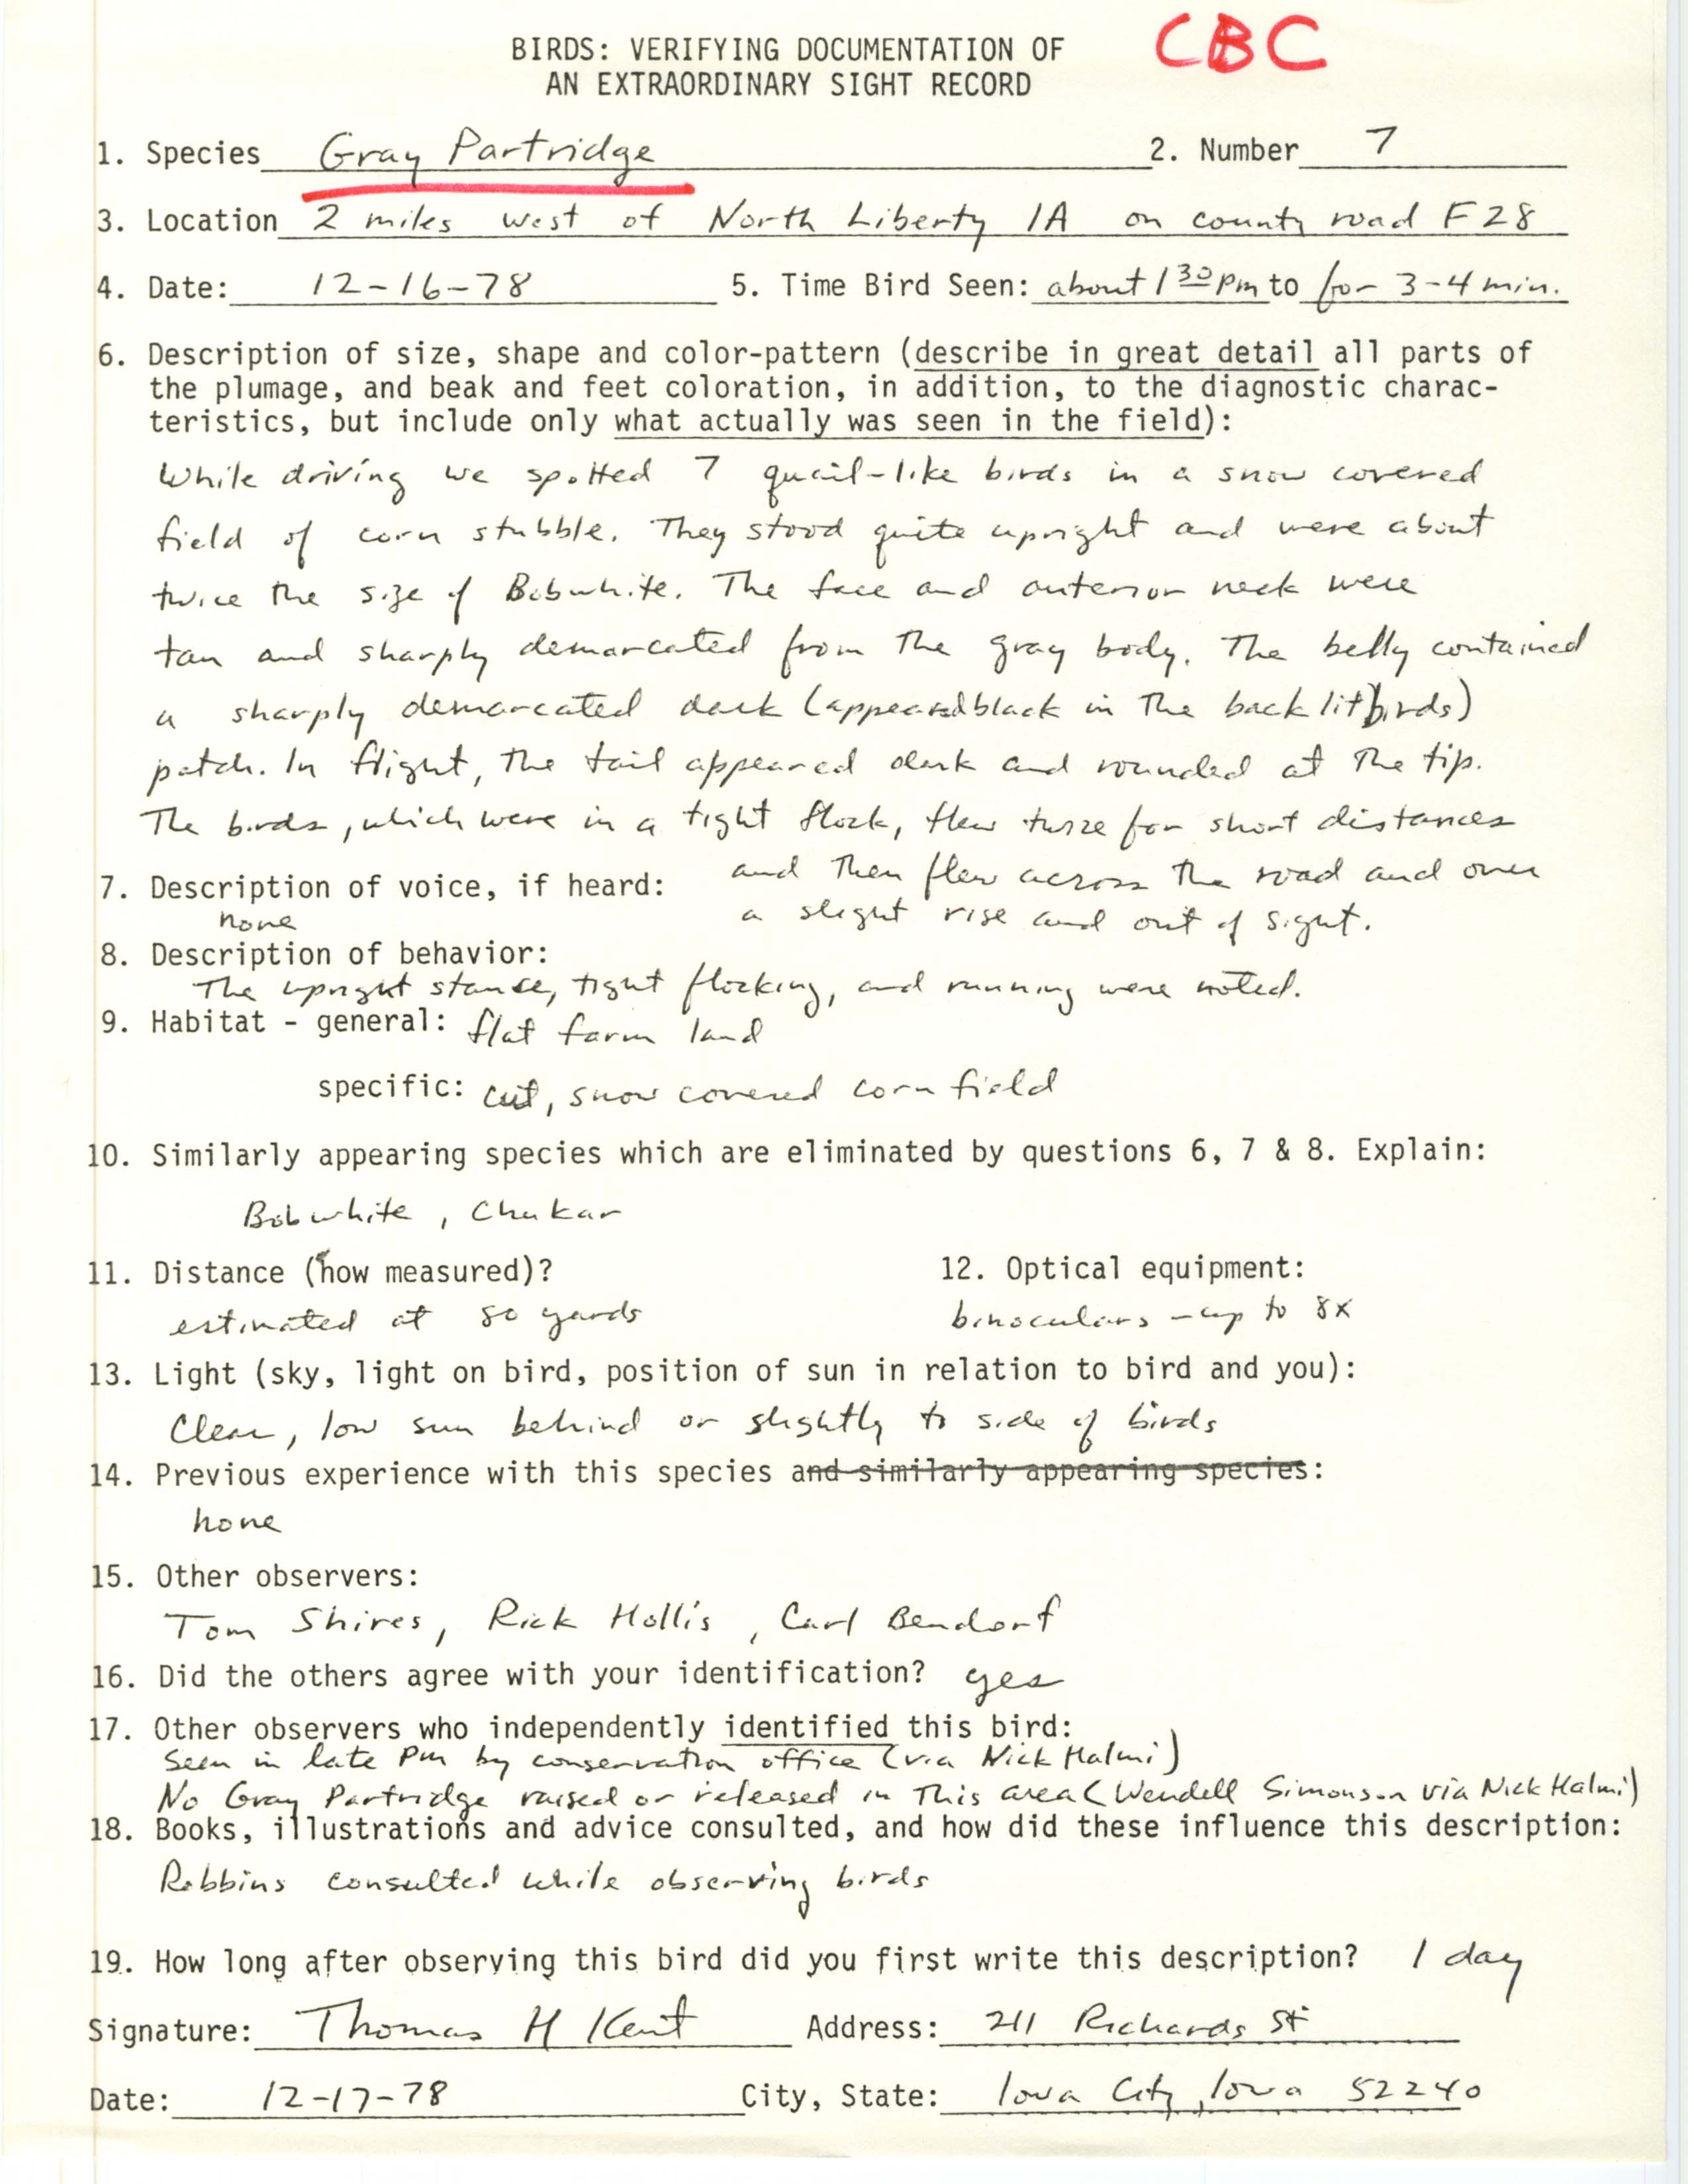 Rare bird documentation form for Gray Partridge west of North Liberty, 1978